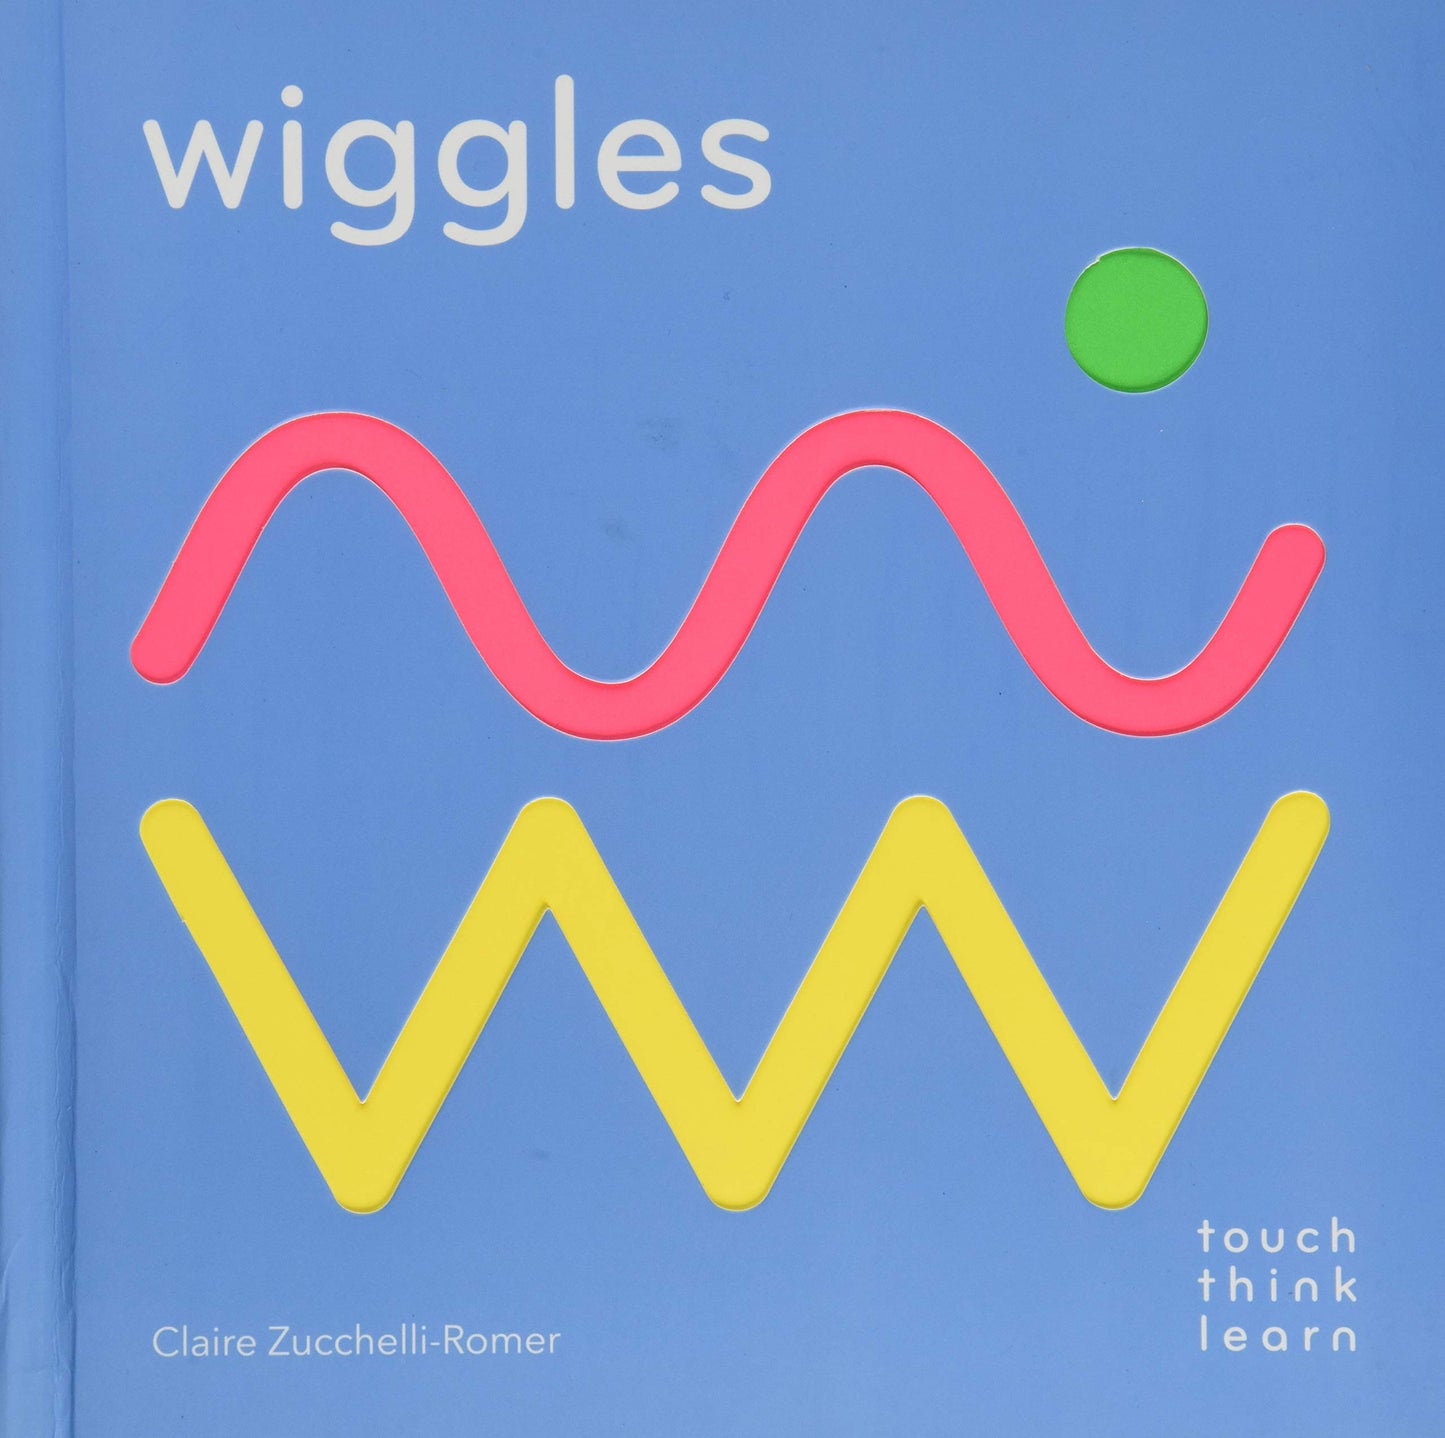 Think Touch Learn: Wiggles